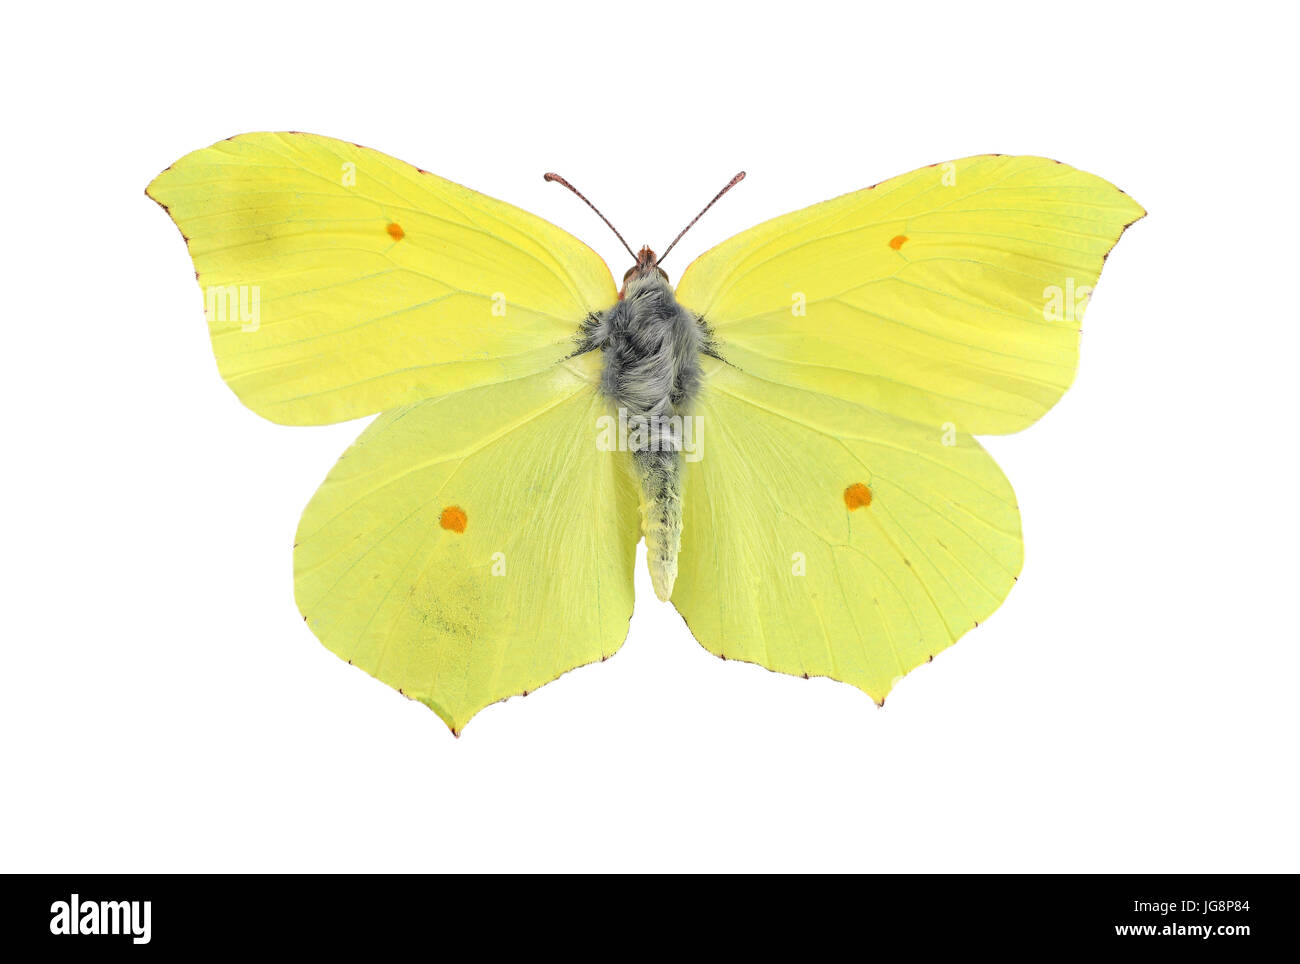 Common brimstone butterfly isolated on white background Stock Photo